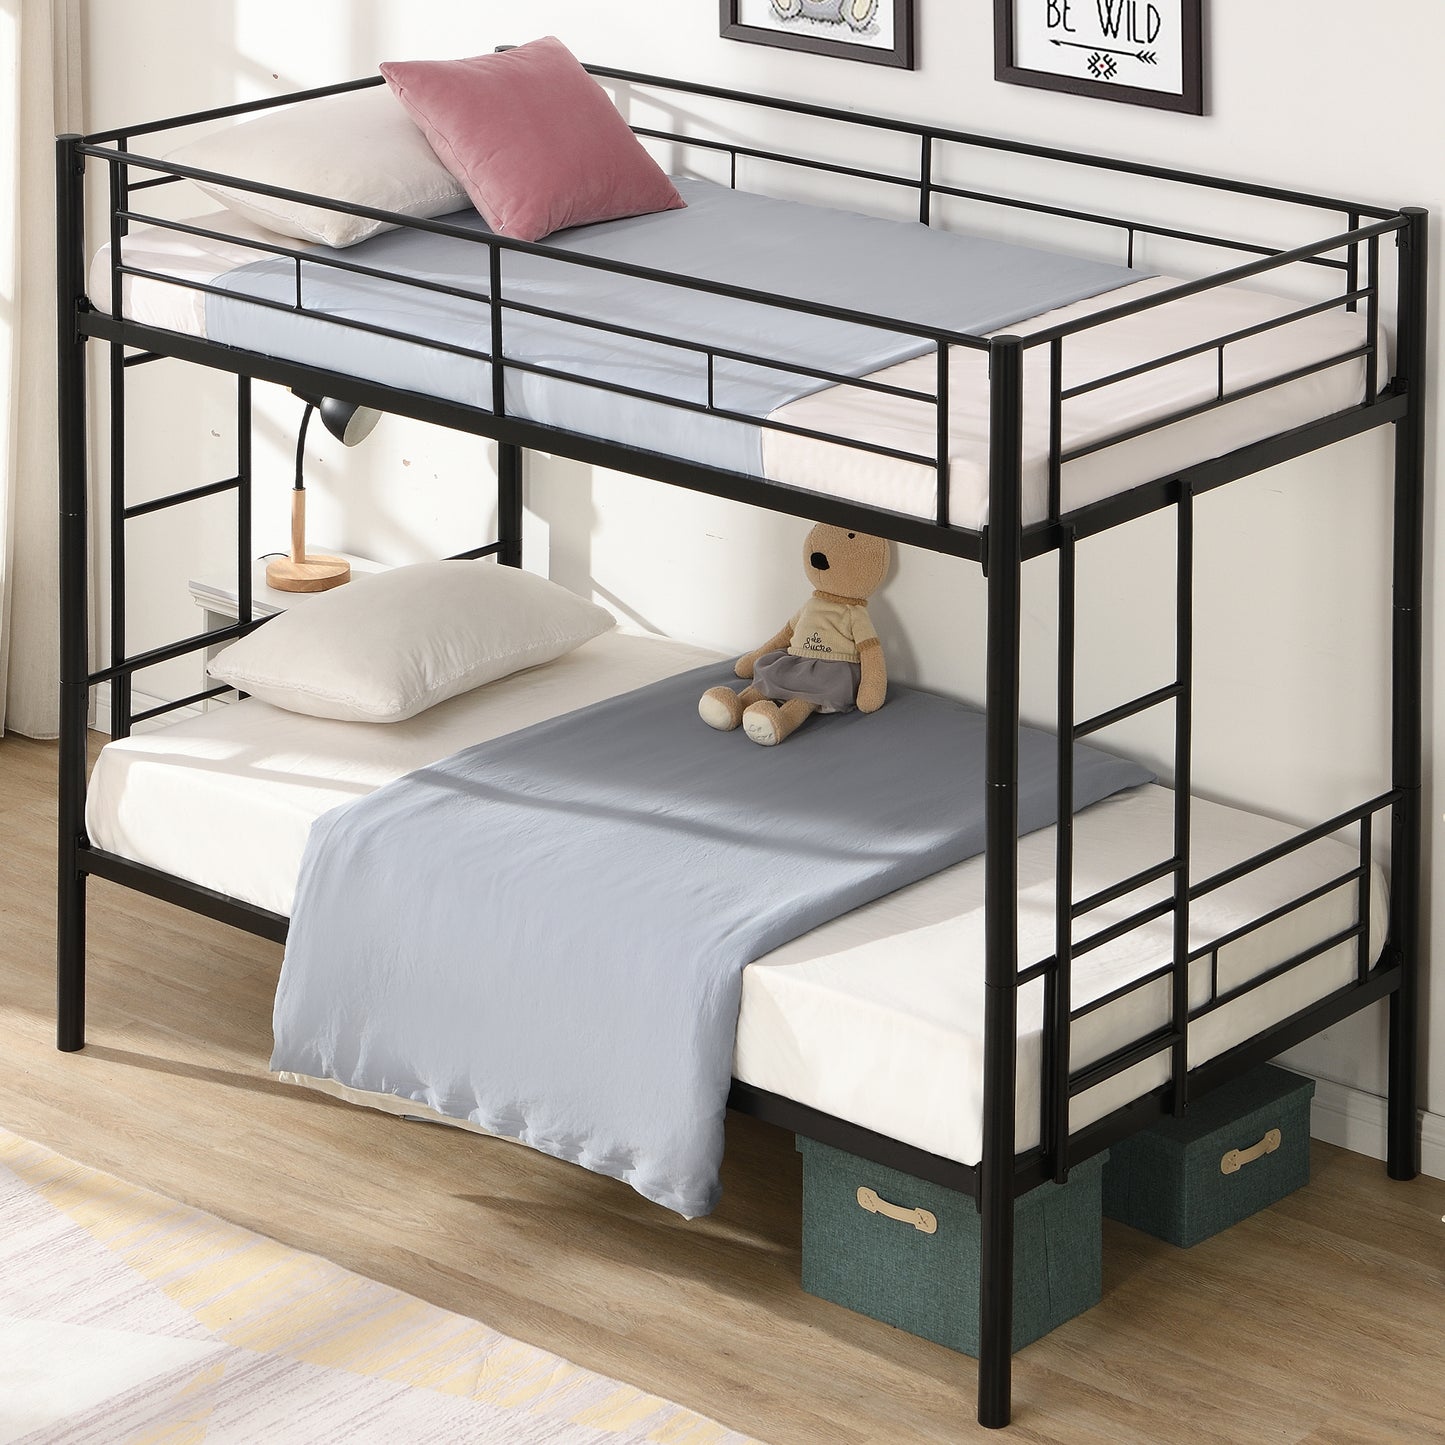 BTMWAY Metal Bunk Bed Twin Over Twin, Convertible Twin Over Twin Bunk Bed with 2 ladders for Kids Bedroom, Heavy Duty Twin Bunk Bed Frame for Bedroom, No Box Spring Needed, Black